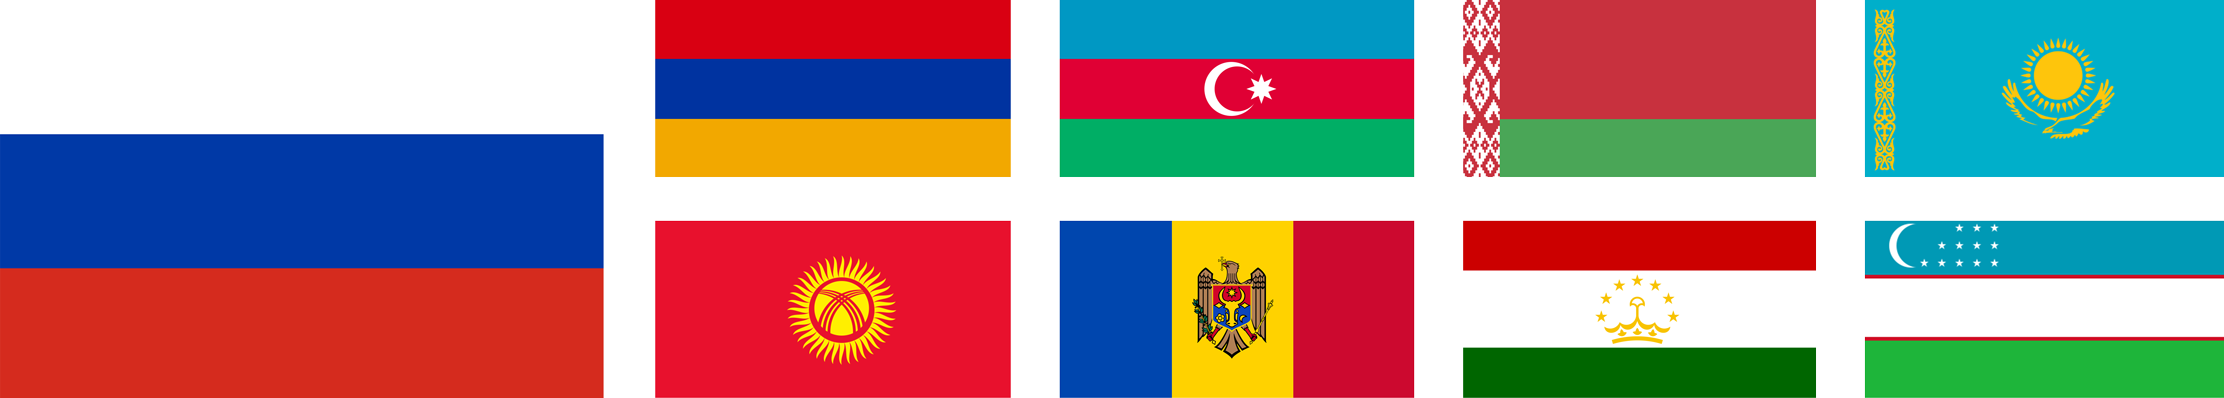 Flag Russia and CIS countries